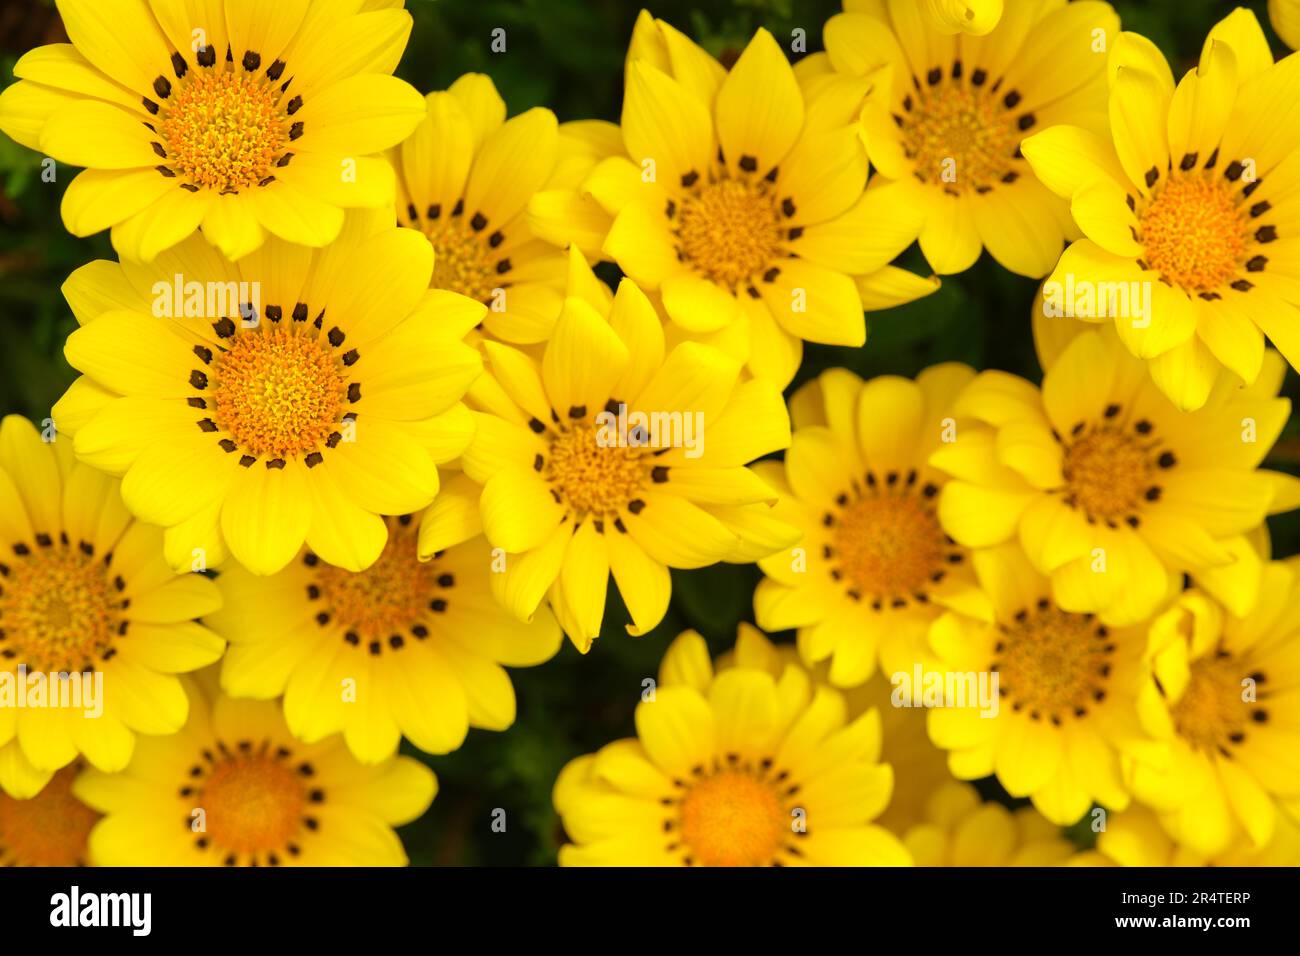 Treasure flower or Gazania rigens, daisy-like composite flower head consisting of bright yellow petals with black spots at the base of the ligules. Stock Photo